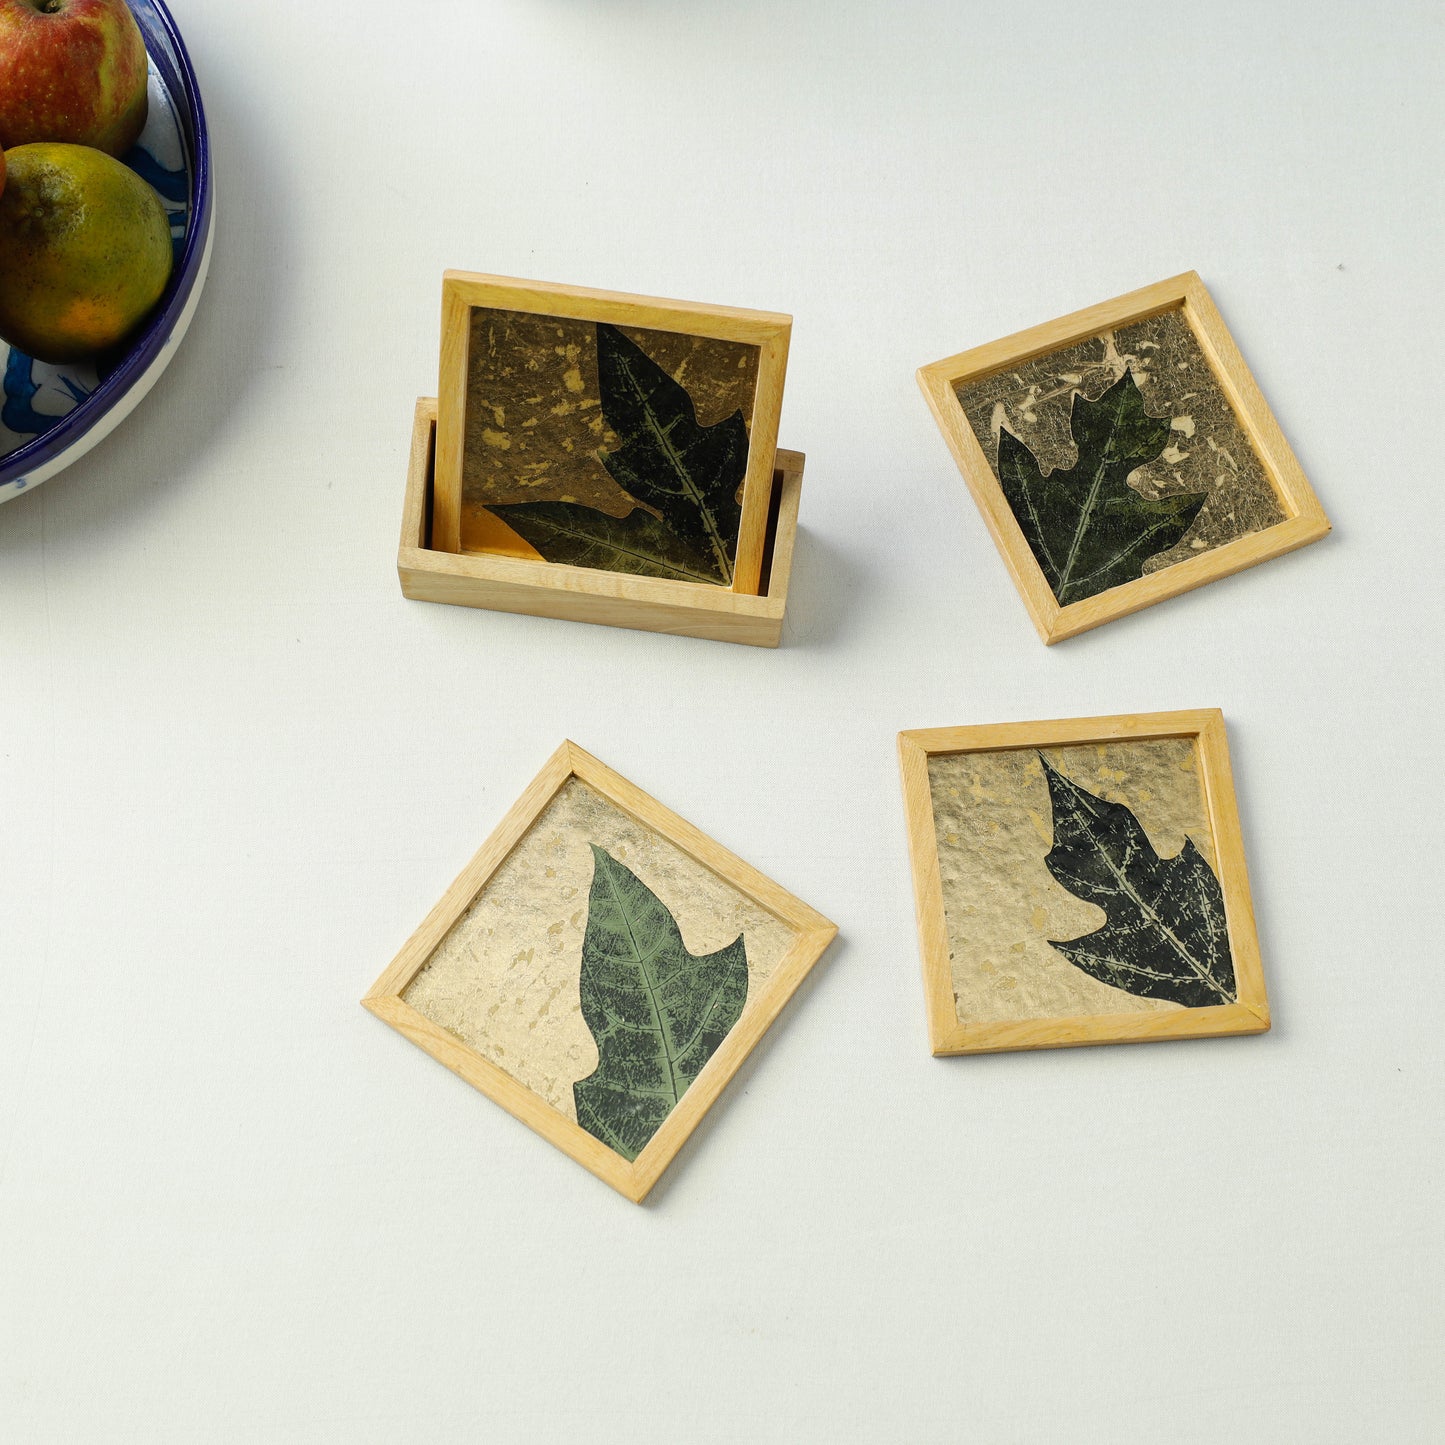 Set of 4 - Gold Carica Papaya Art Work Wooden Square Coasters (4 x 4 in)